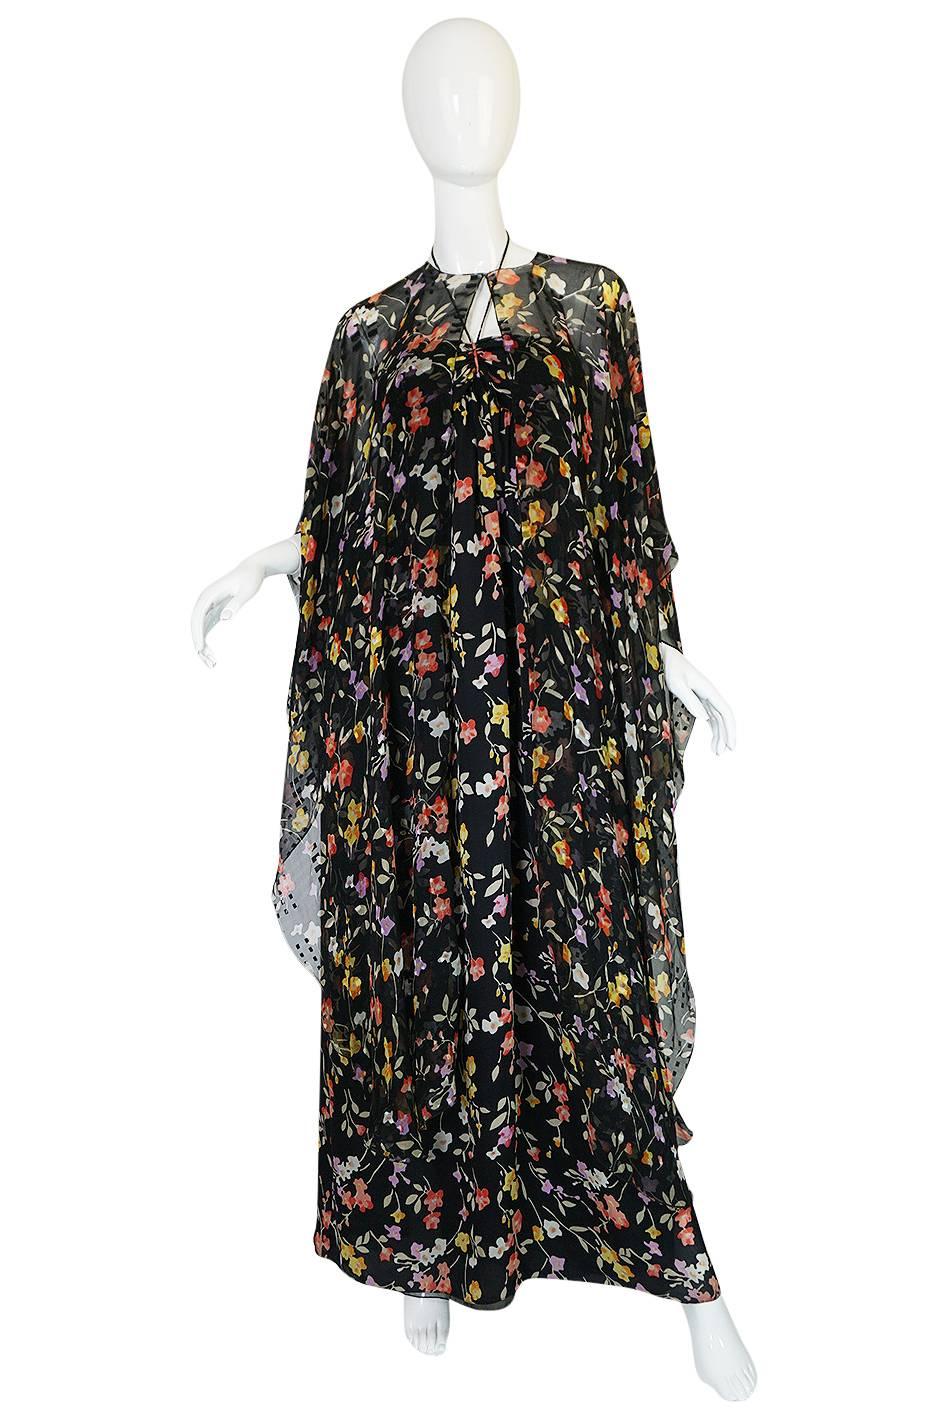 This is a beautiful and romantic full length dress with a matching full length scarf or cape piece that can be worn in a variety of ways by the great American couturier Oscar de la Renta. Both pieces are constructed from a lightweight, printed silk